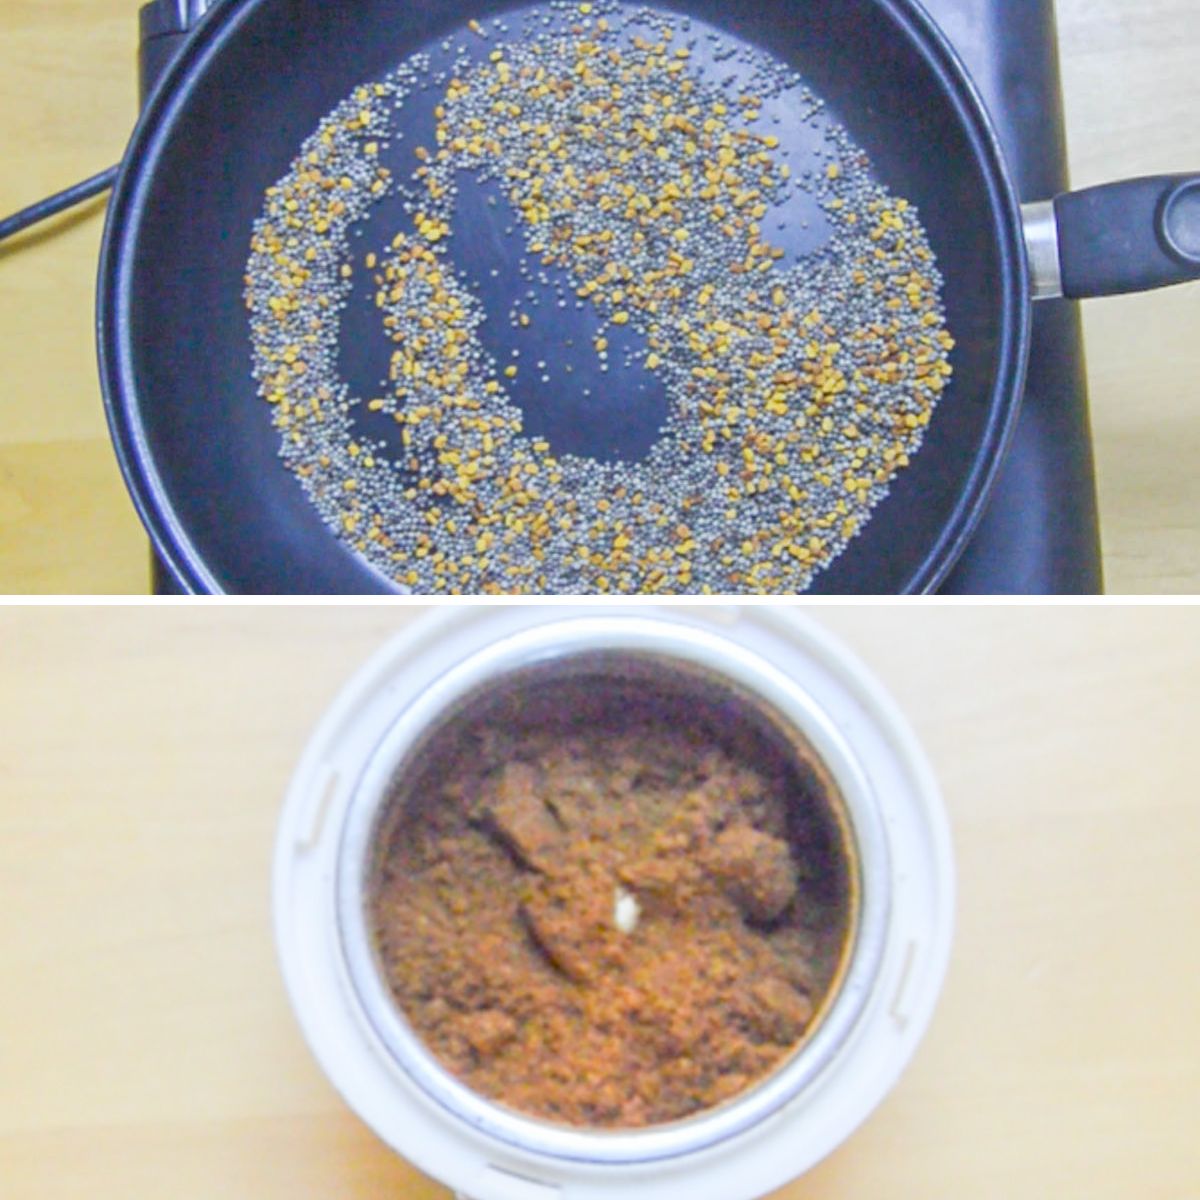 collage of 2 images with top image of whole spices in a black pan and bottom image of the brown powder in the white mixer jar.